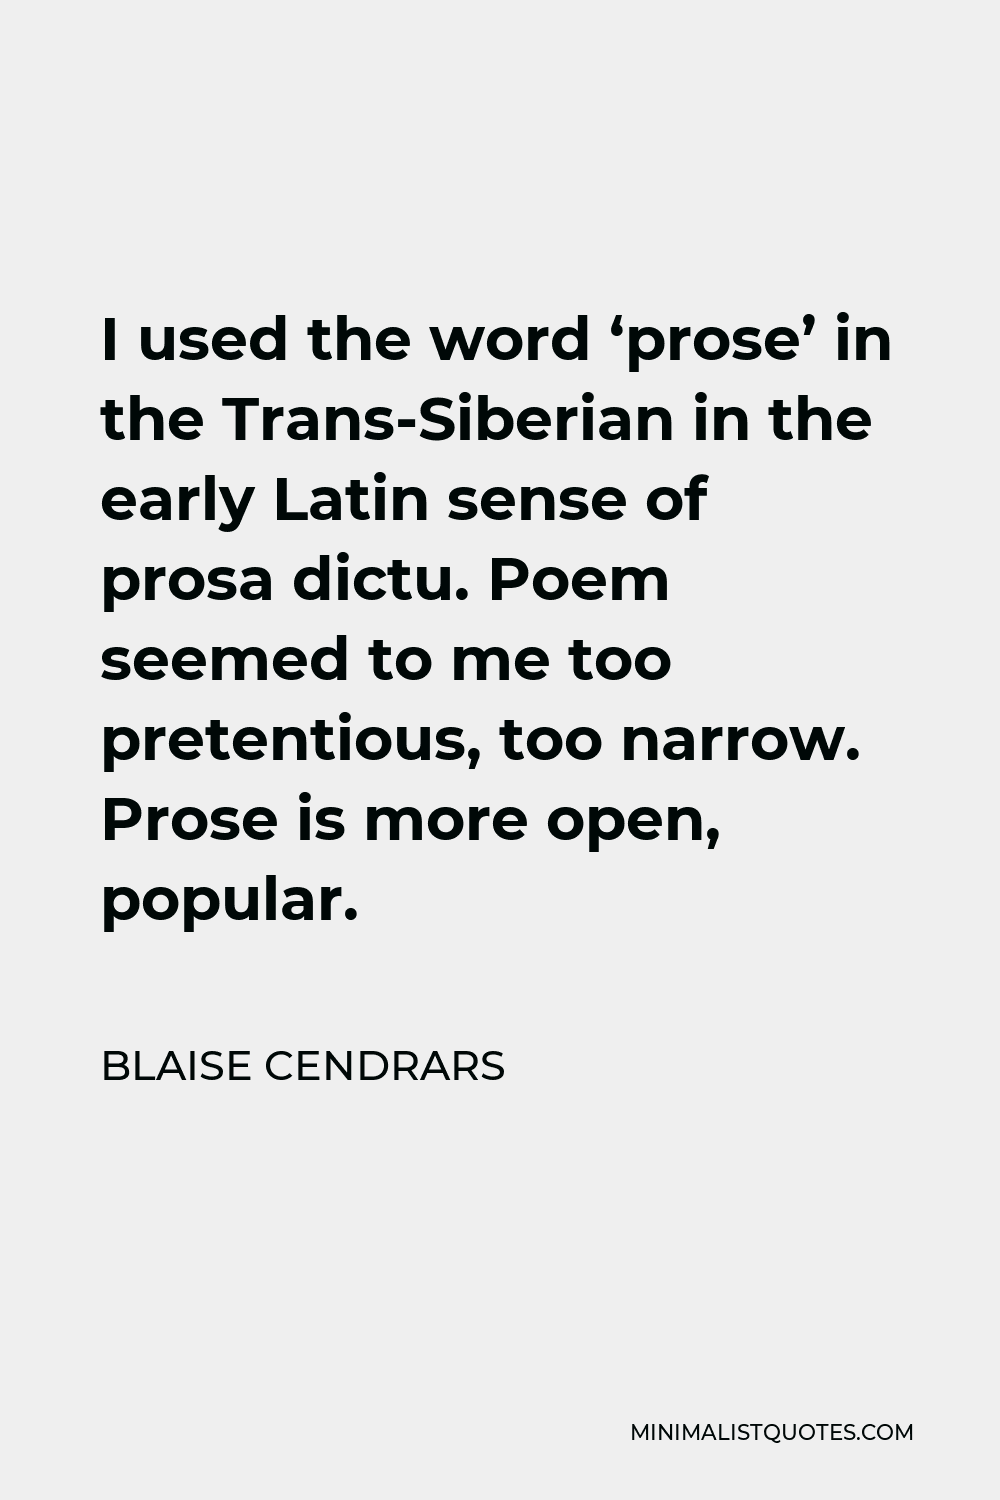 Blaise Cendrars Quote - I used the word ‘prose’ in the Trans-Siberian in the early Latin sense of prosa dictu. Poem seemed to me too pretentious, too narrow. Prose is more open, popular.